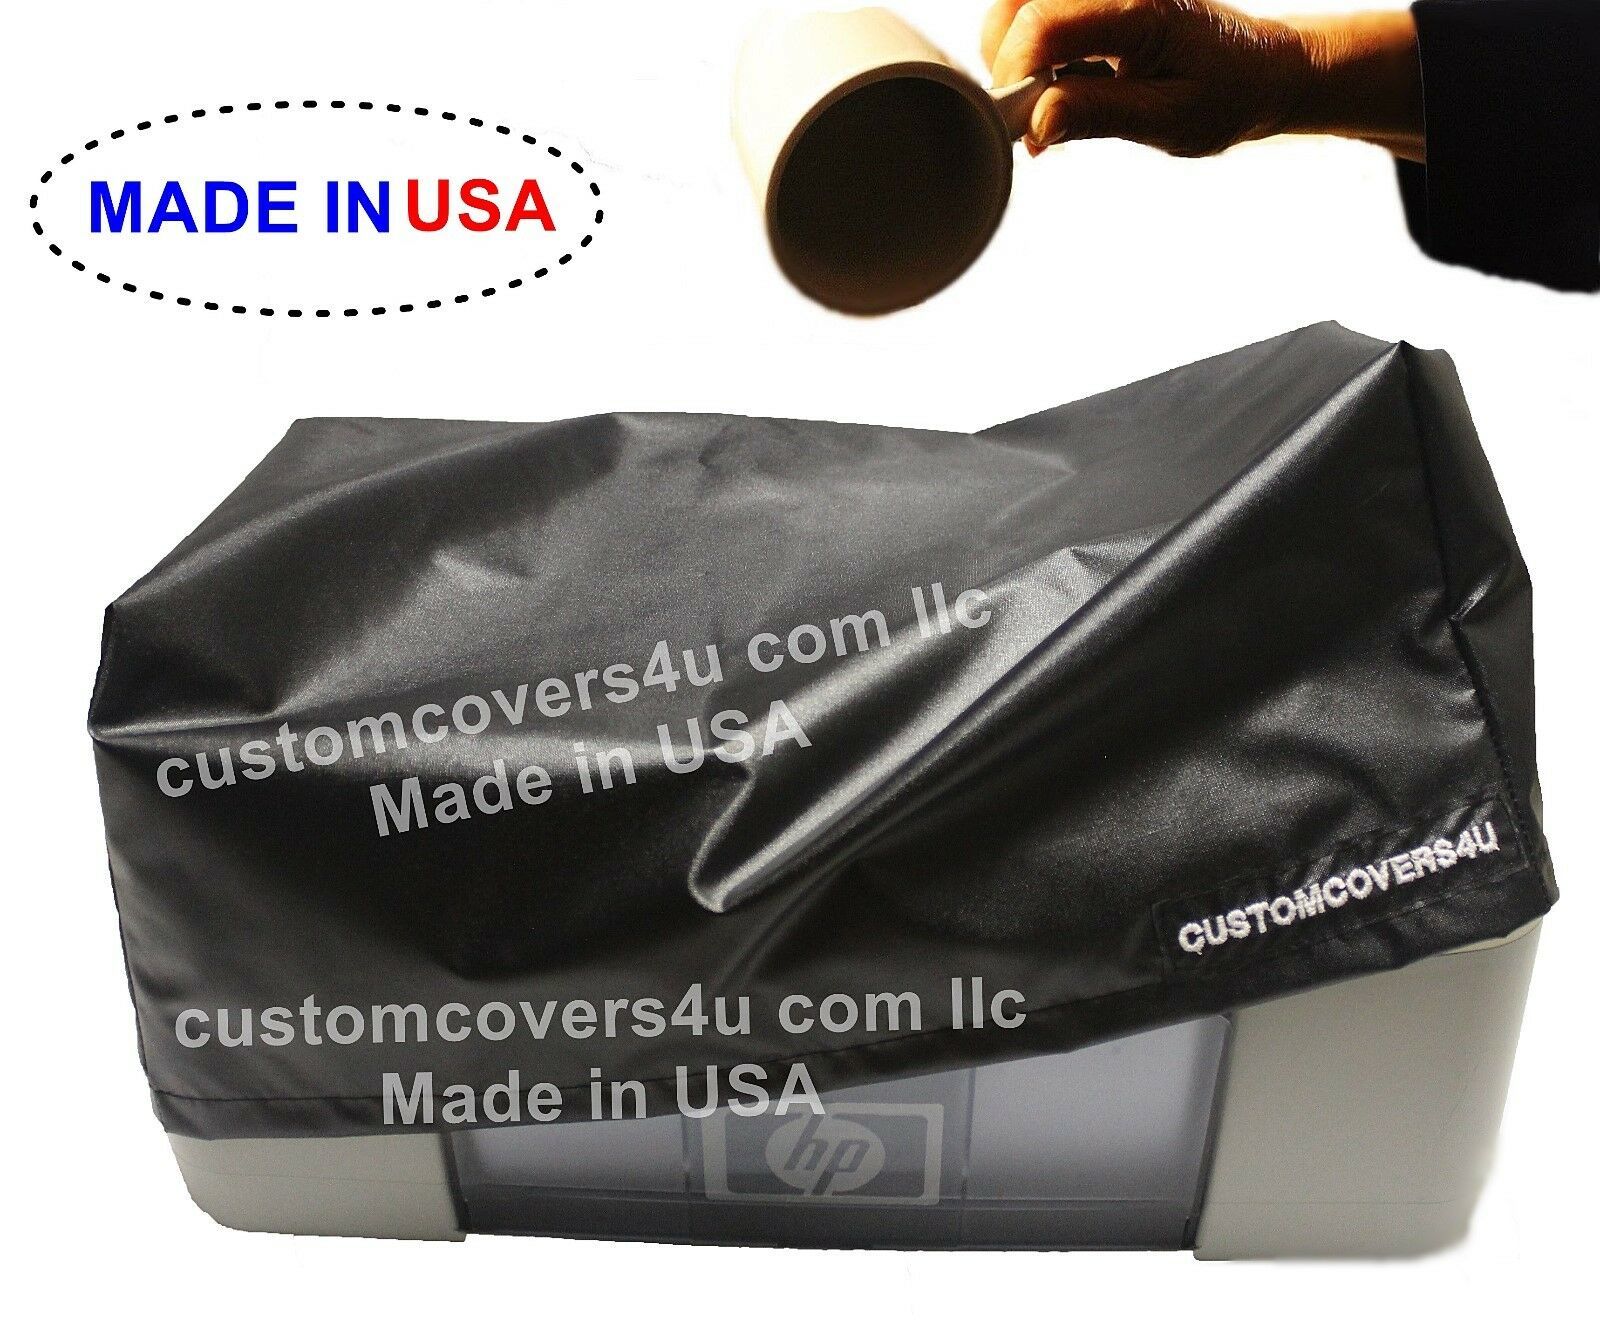 Customcovers4ucom Dust Cover fits Hewlett Packard OFFICEJET PRO 8025 + EMBROIDER - $18.99